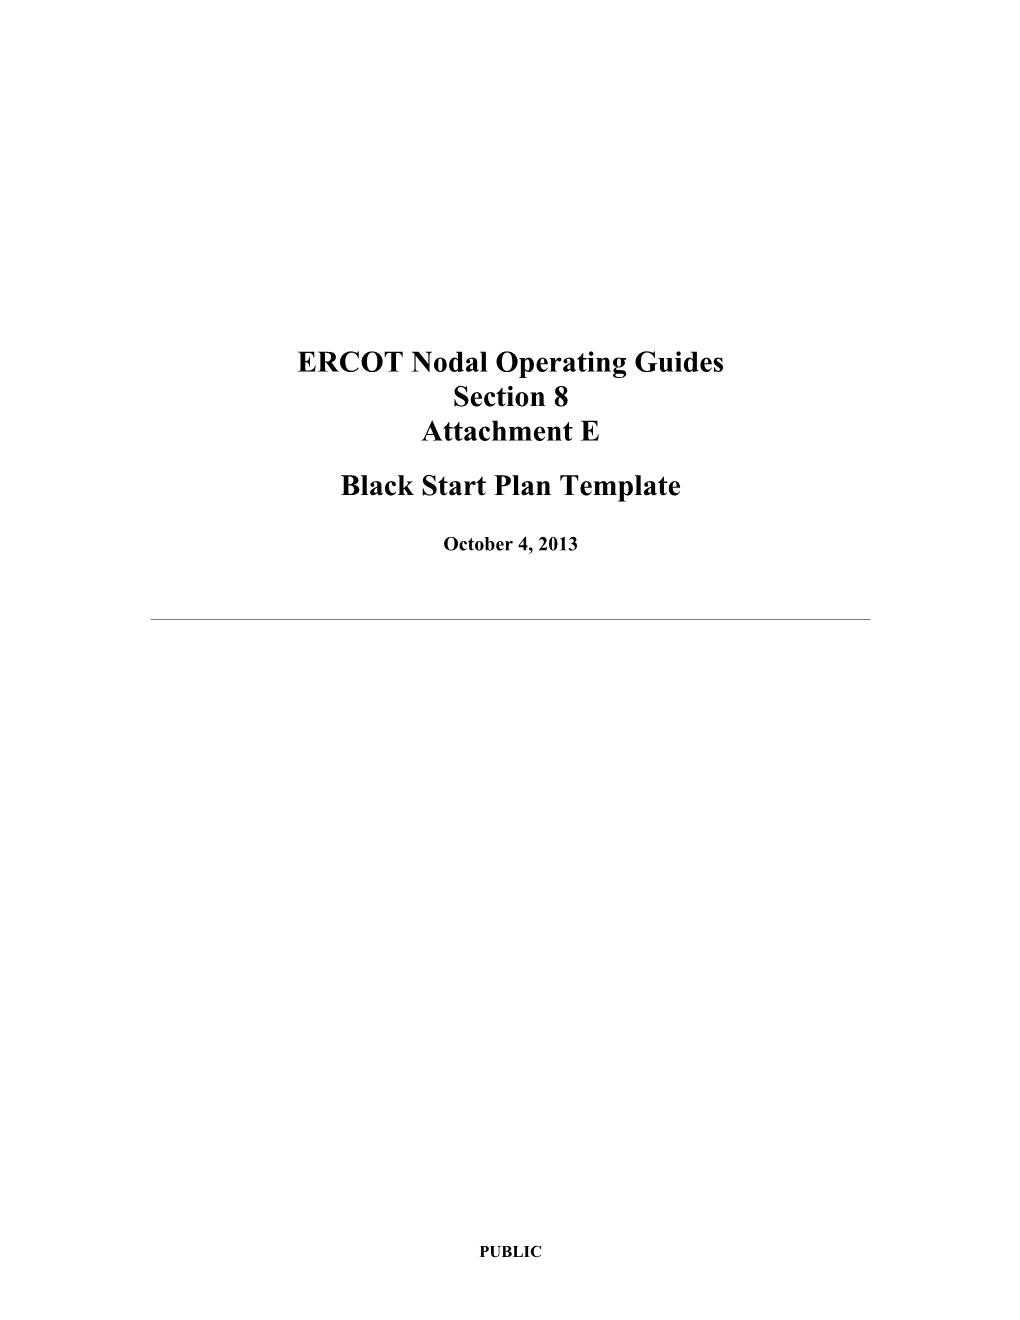 ERCOT Operating Guides